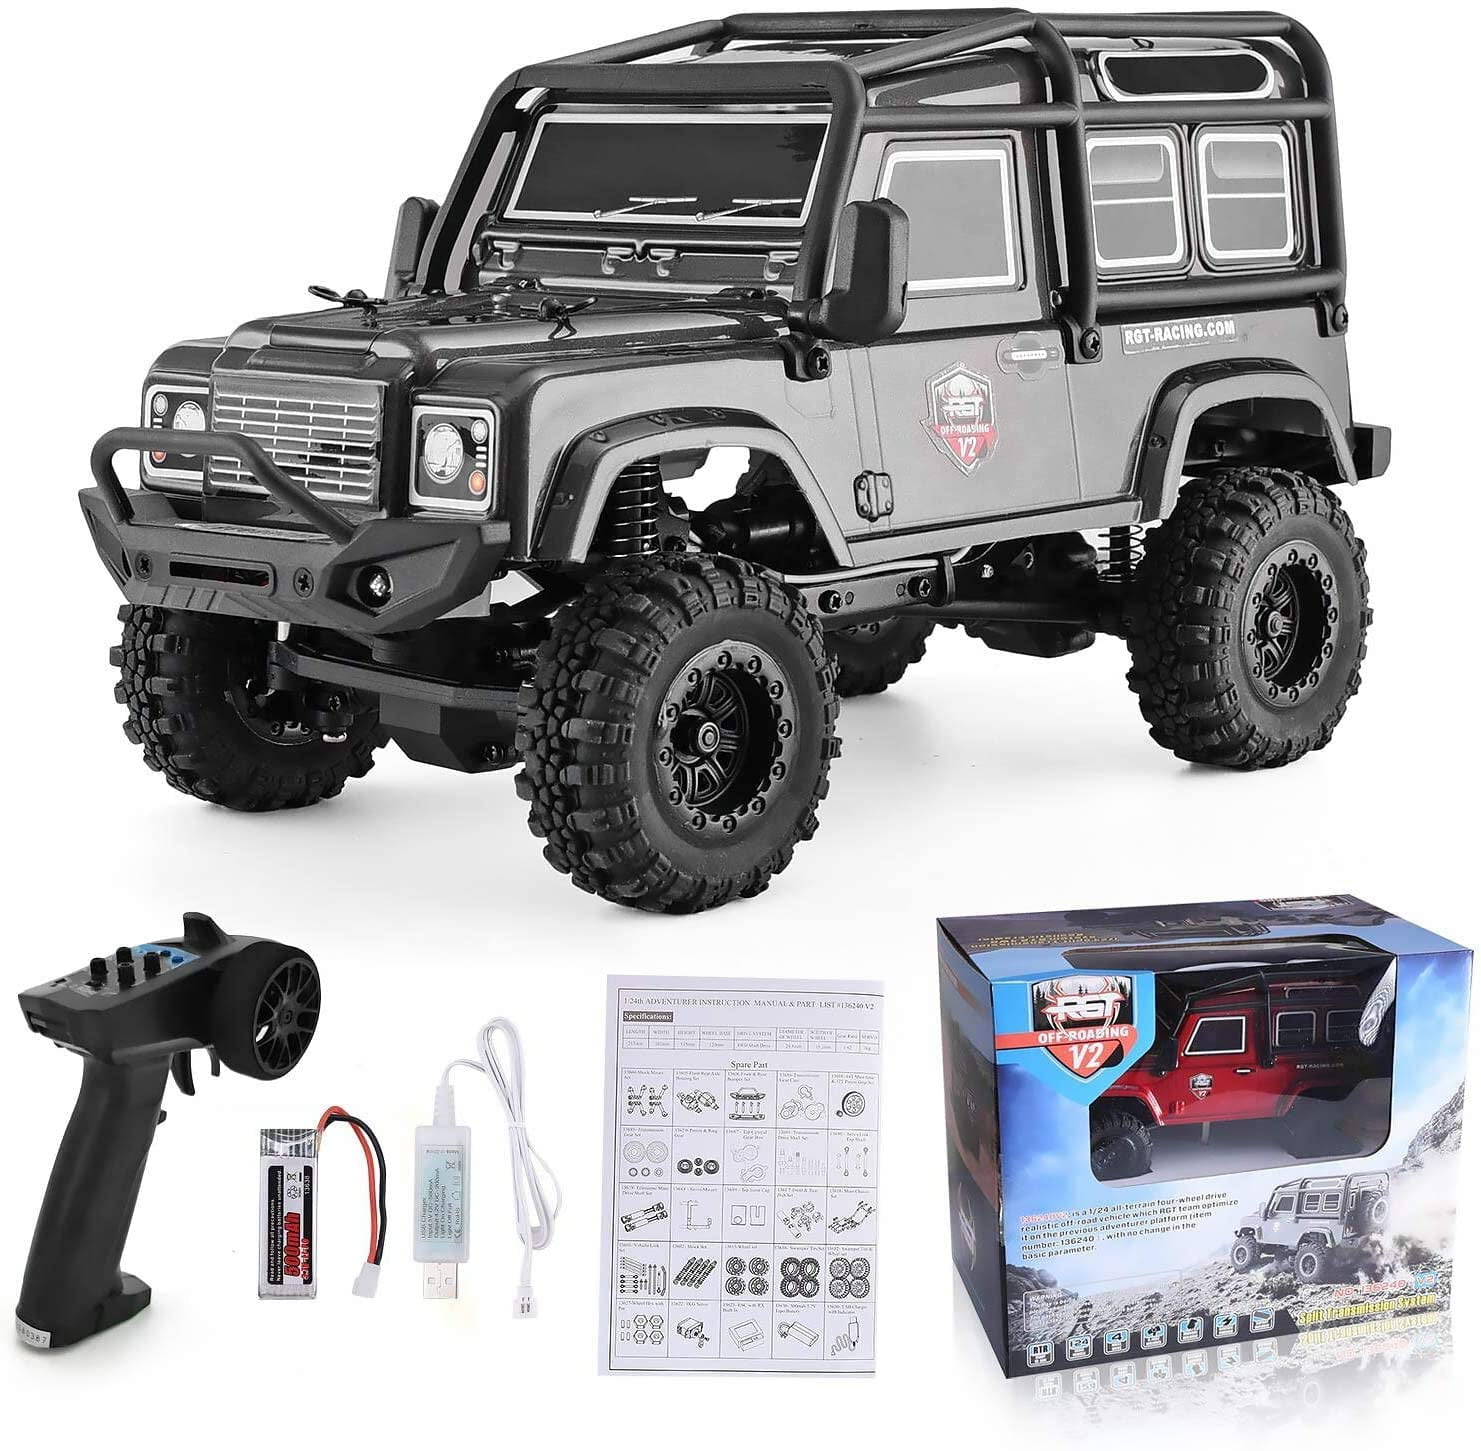 RGT 1/10 Scale 4wd 2.4GHz RC Crawlers Electric Off Road Rock 4x4 